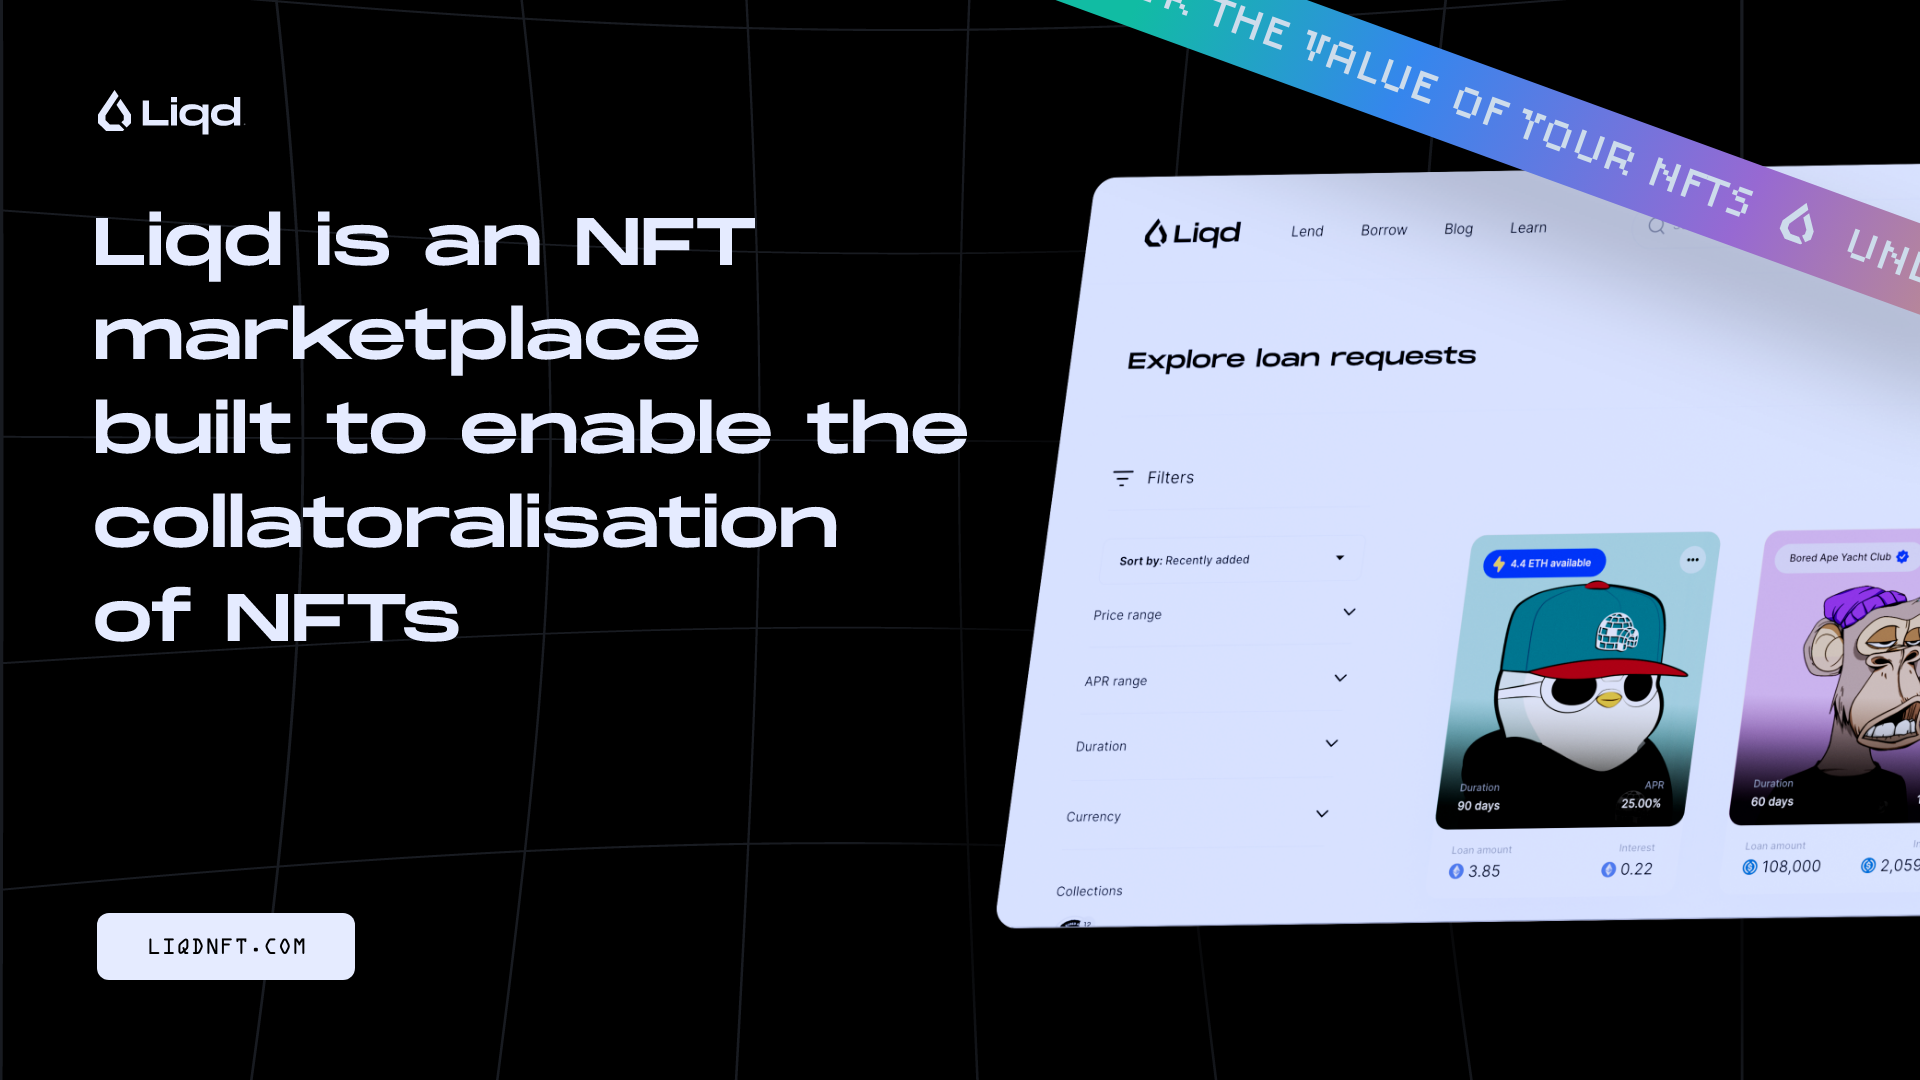 , Unlock the value of NFTs, without selling them Introducing Liqd, a new NFT marketplace